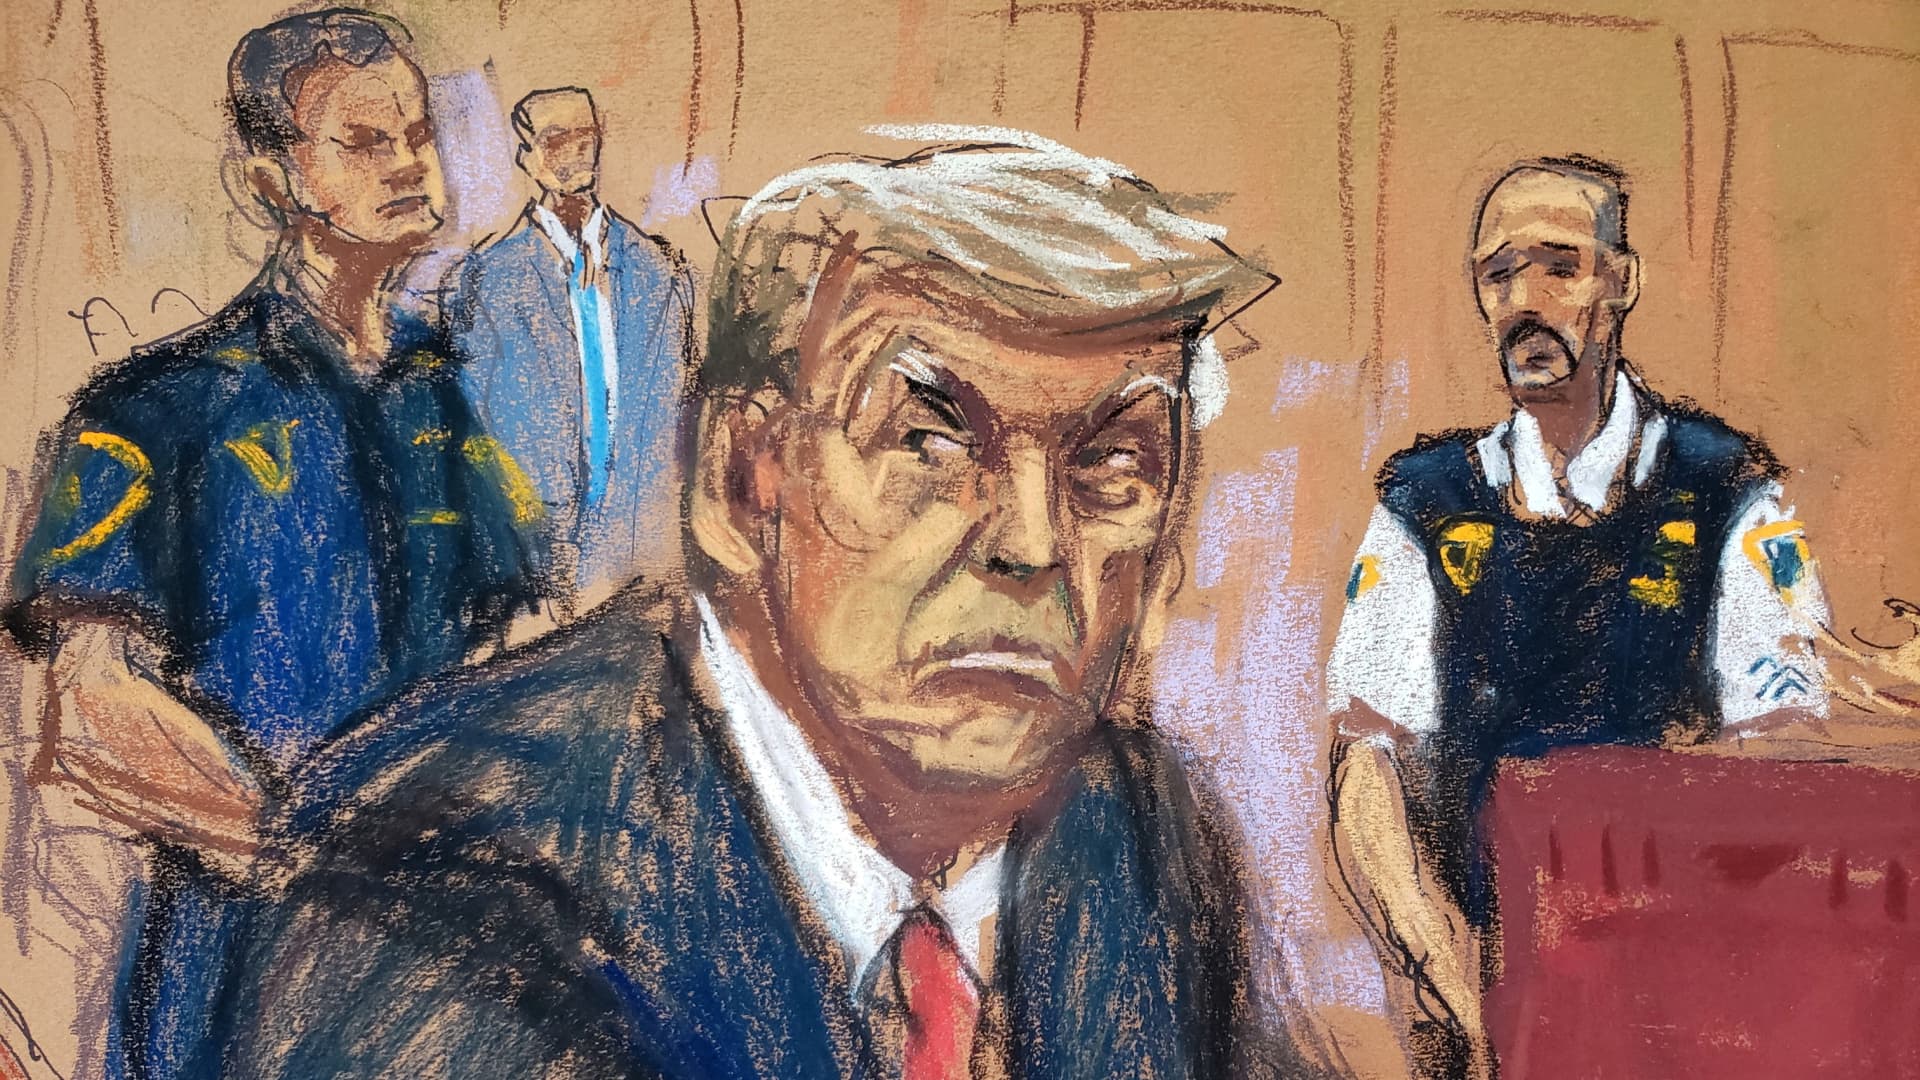 Former U.S. President Donald Trump appears in court for an arraignment on charges stemming from his indictment by a Manhattan grand jury following a probe into hush money paid to porn star Stormy Daniels, in New York City, U.S., April 4, 2023, in this courtroom sketch 